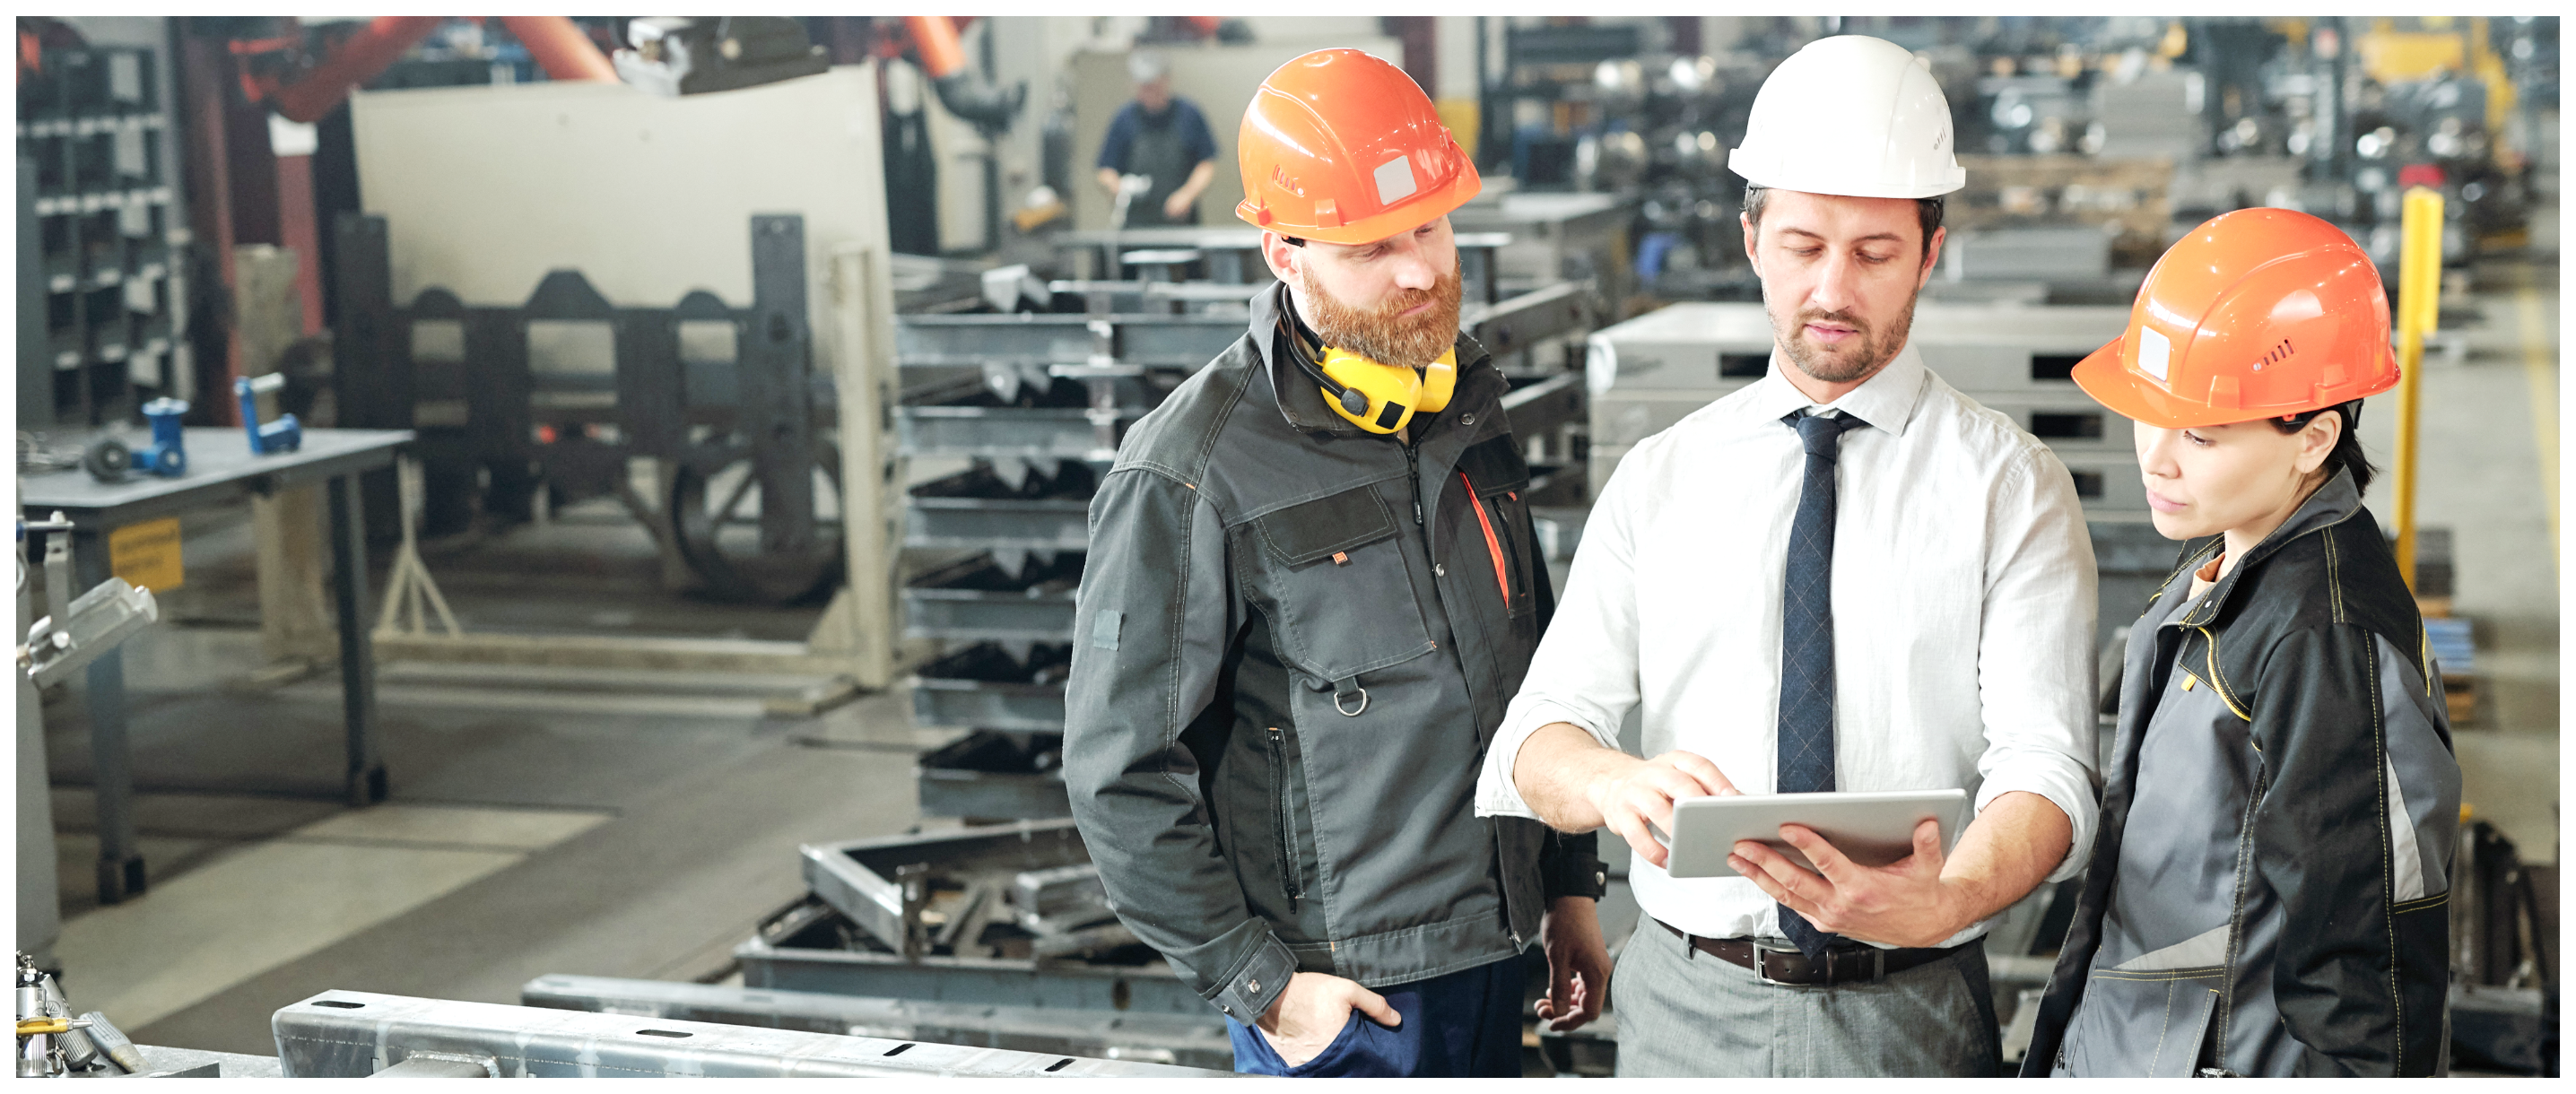 Using a digital tablet and helmets, a warehouse team discusses one another.